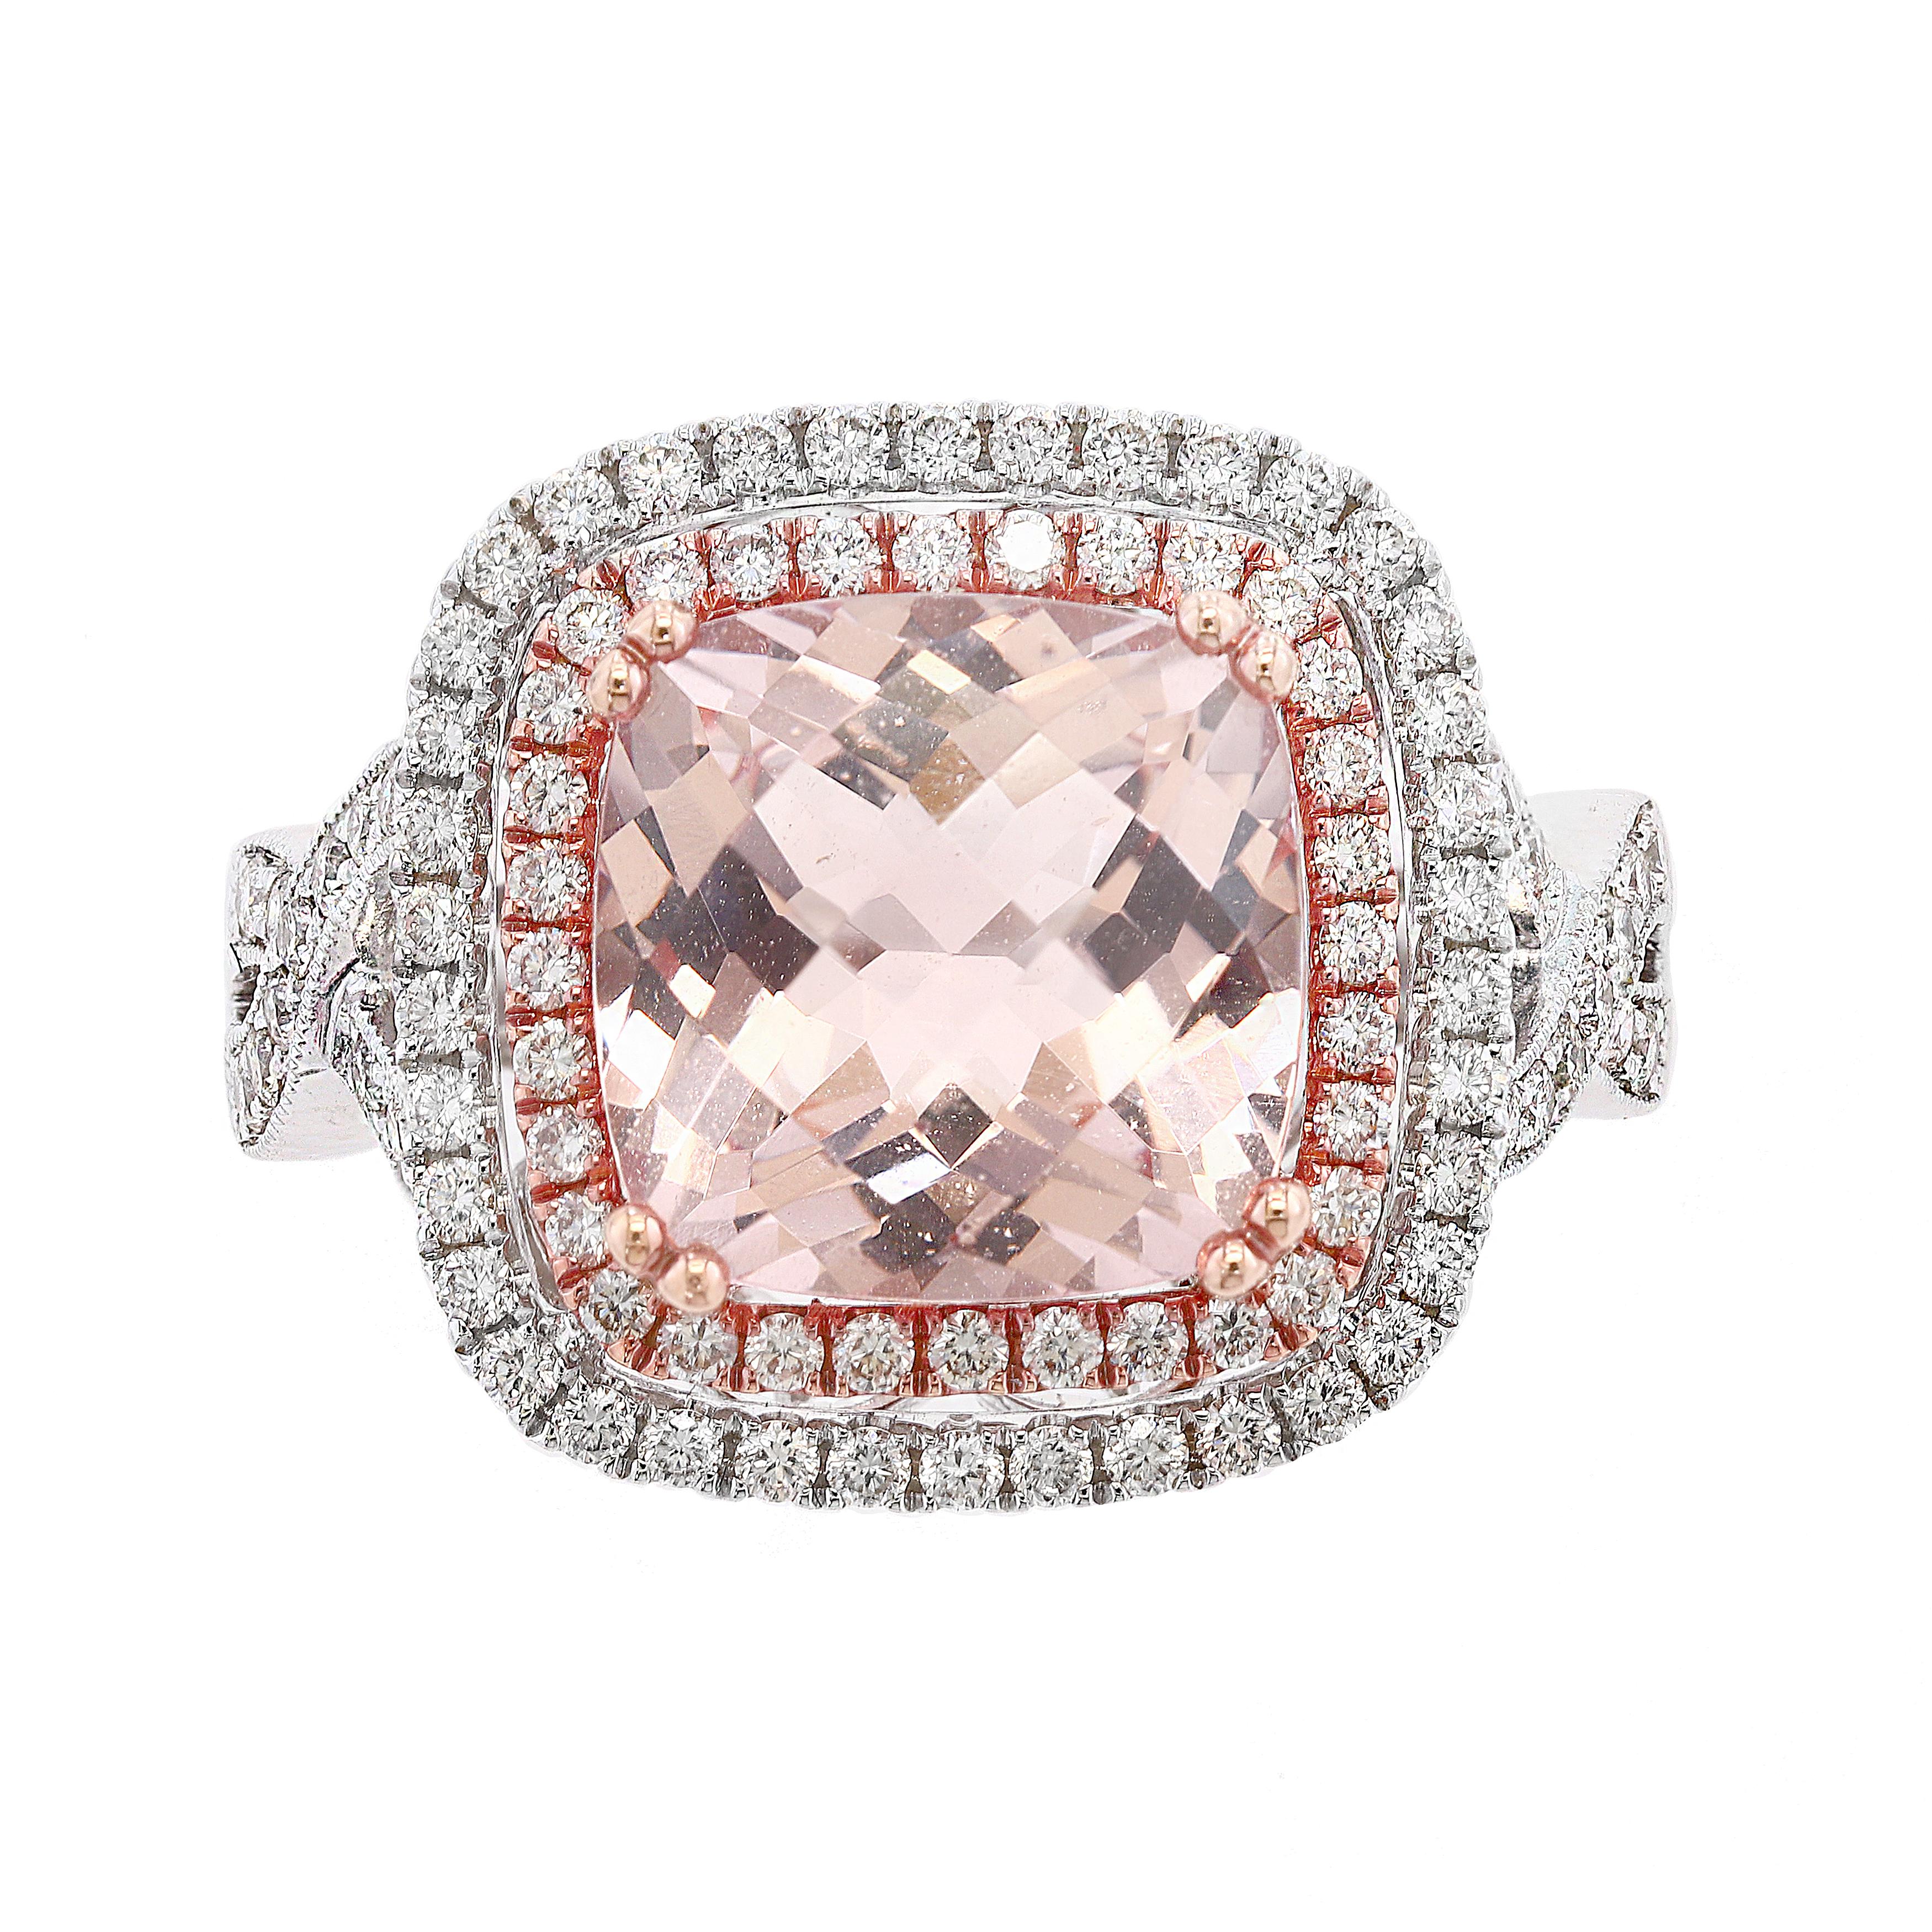 Features a 3.52carat cushion cut morganite, surrounded by two rows of round brilliant diamonds. Set in a 14K White Gold and Rose Gold mounting accented with diamonds. Total weight of diamonds is 0.67 carats. 

Size 6 US.
All diamonds are GH color